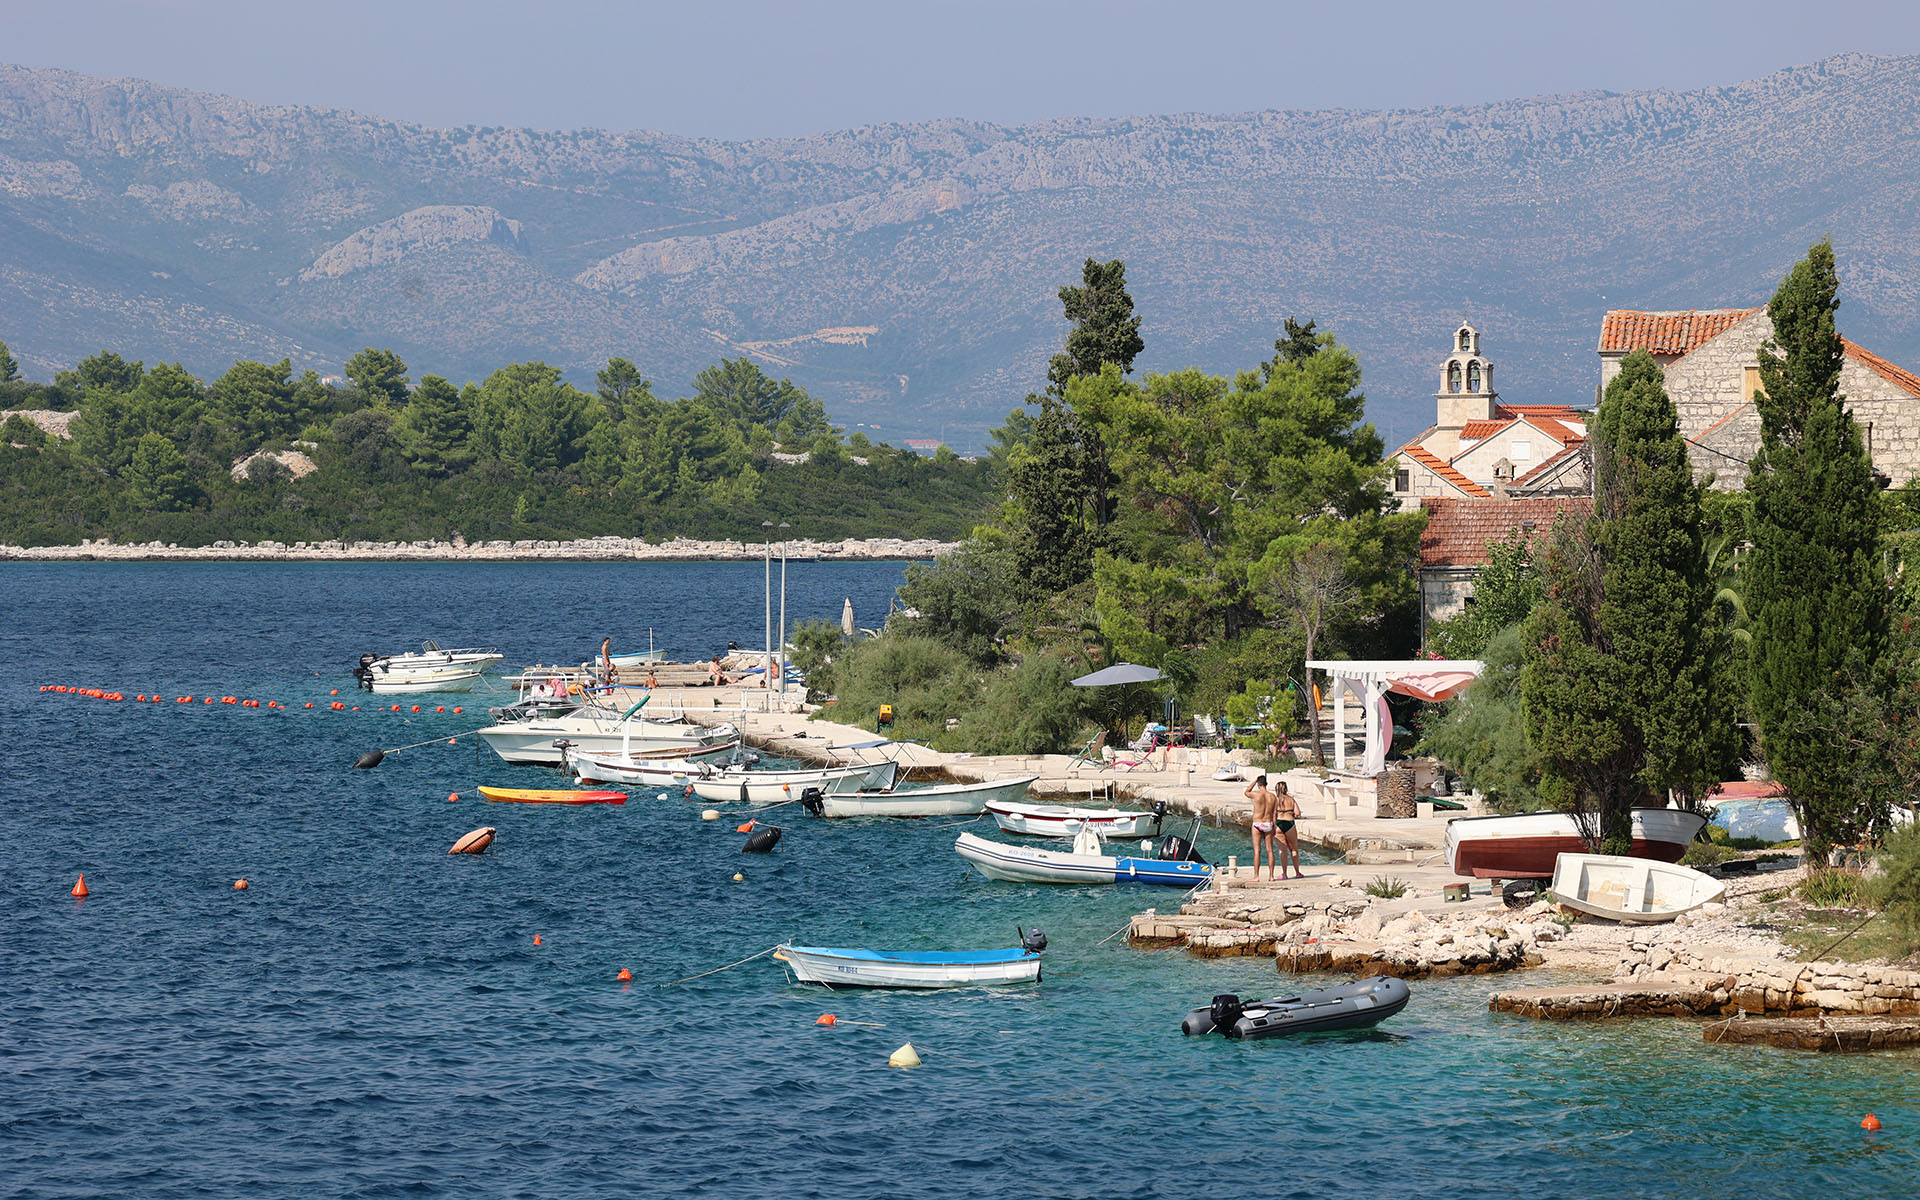 A view of a shoreline in Croatia with vacationers and boats on the rocky shoreline